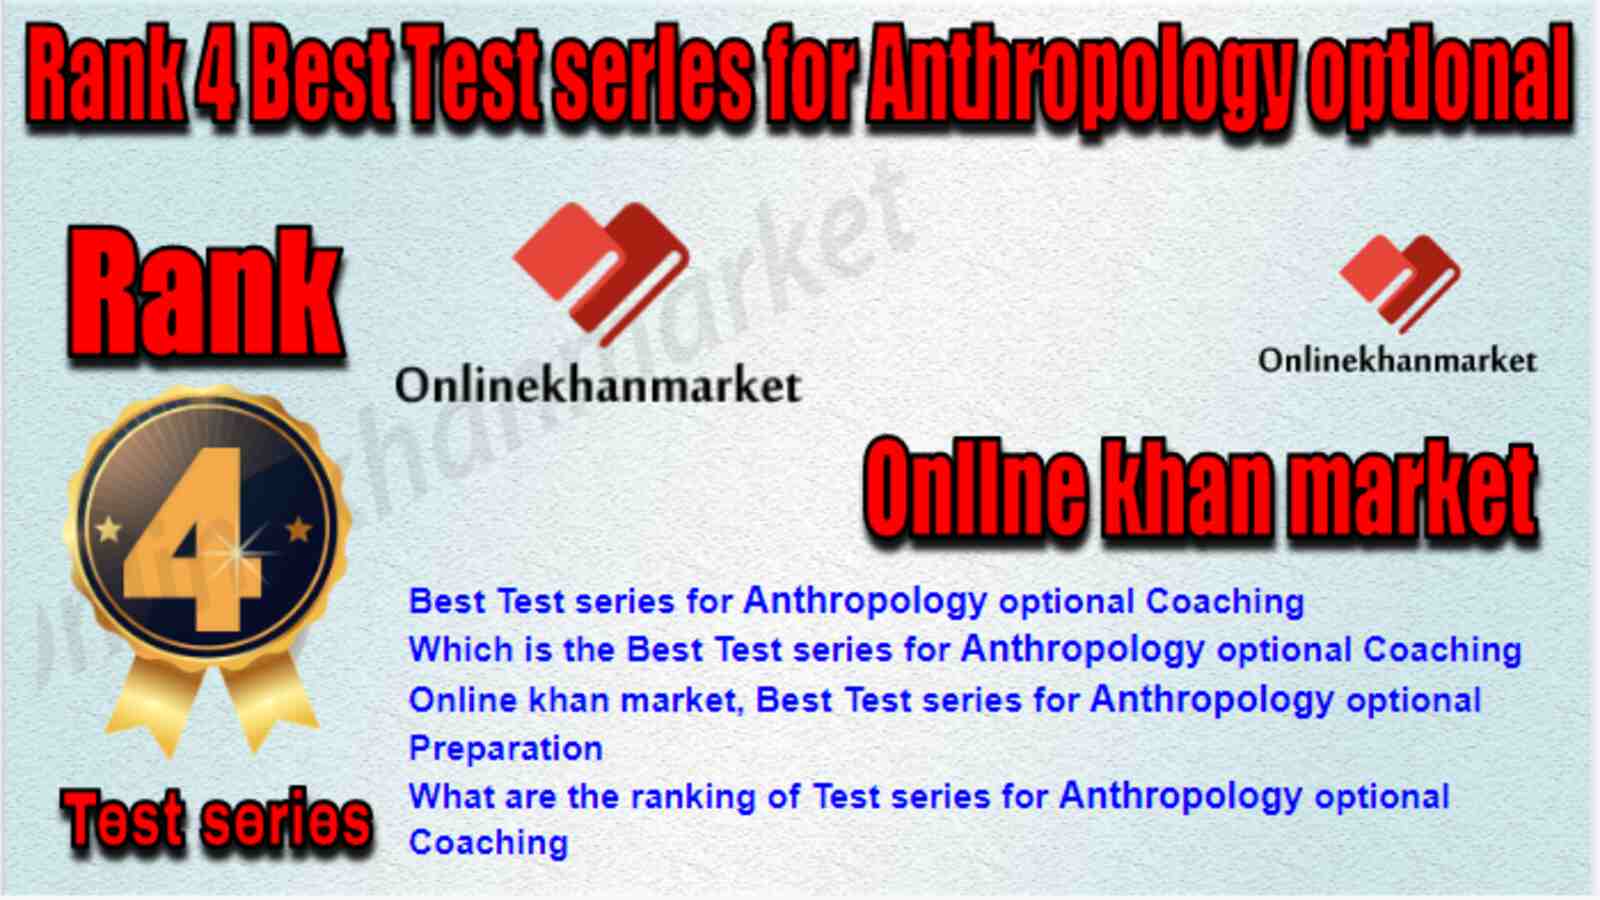 Rank 4 Best Test series for Anthropology optional